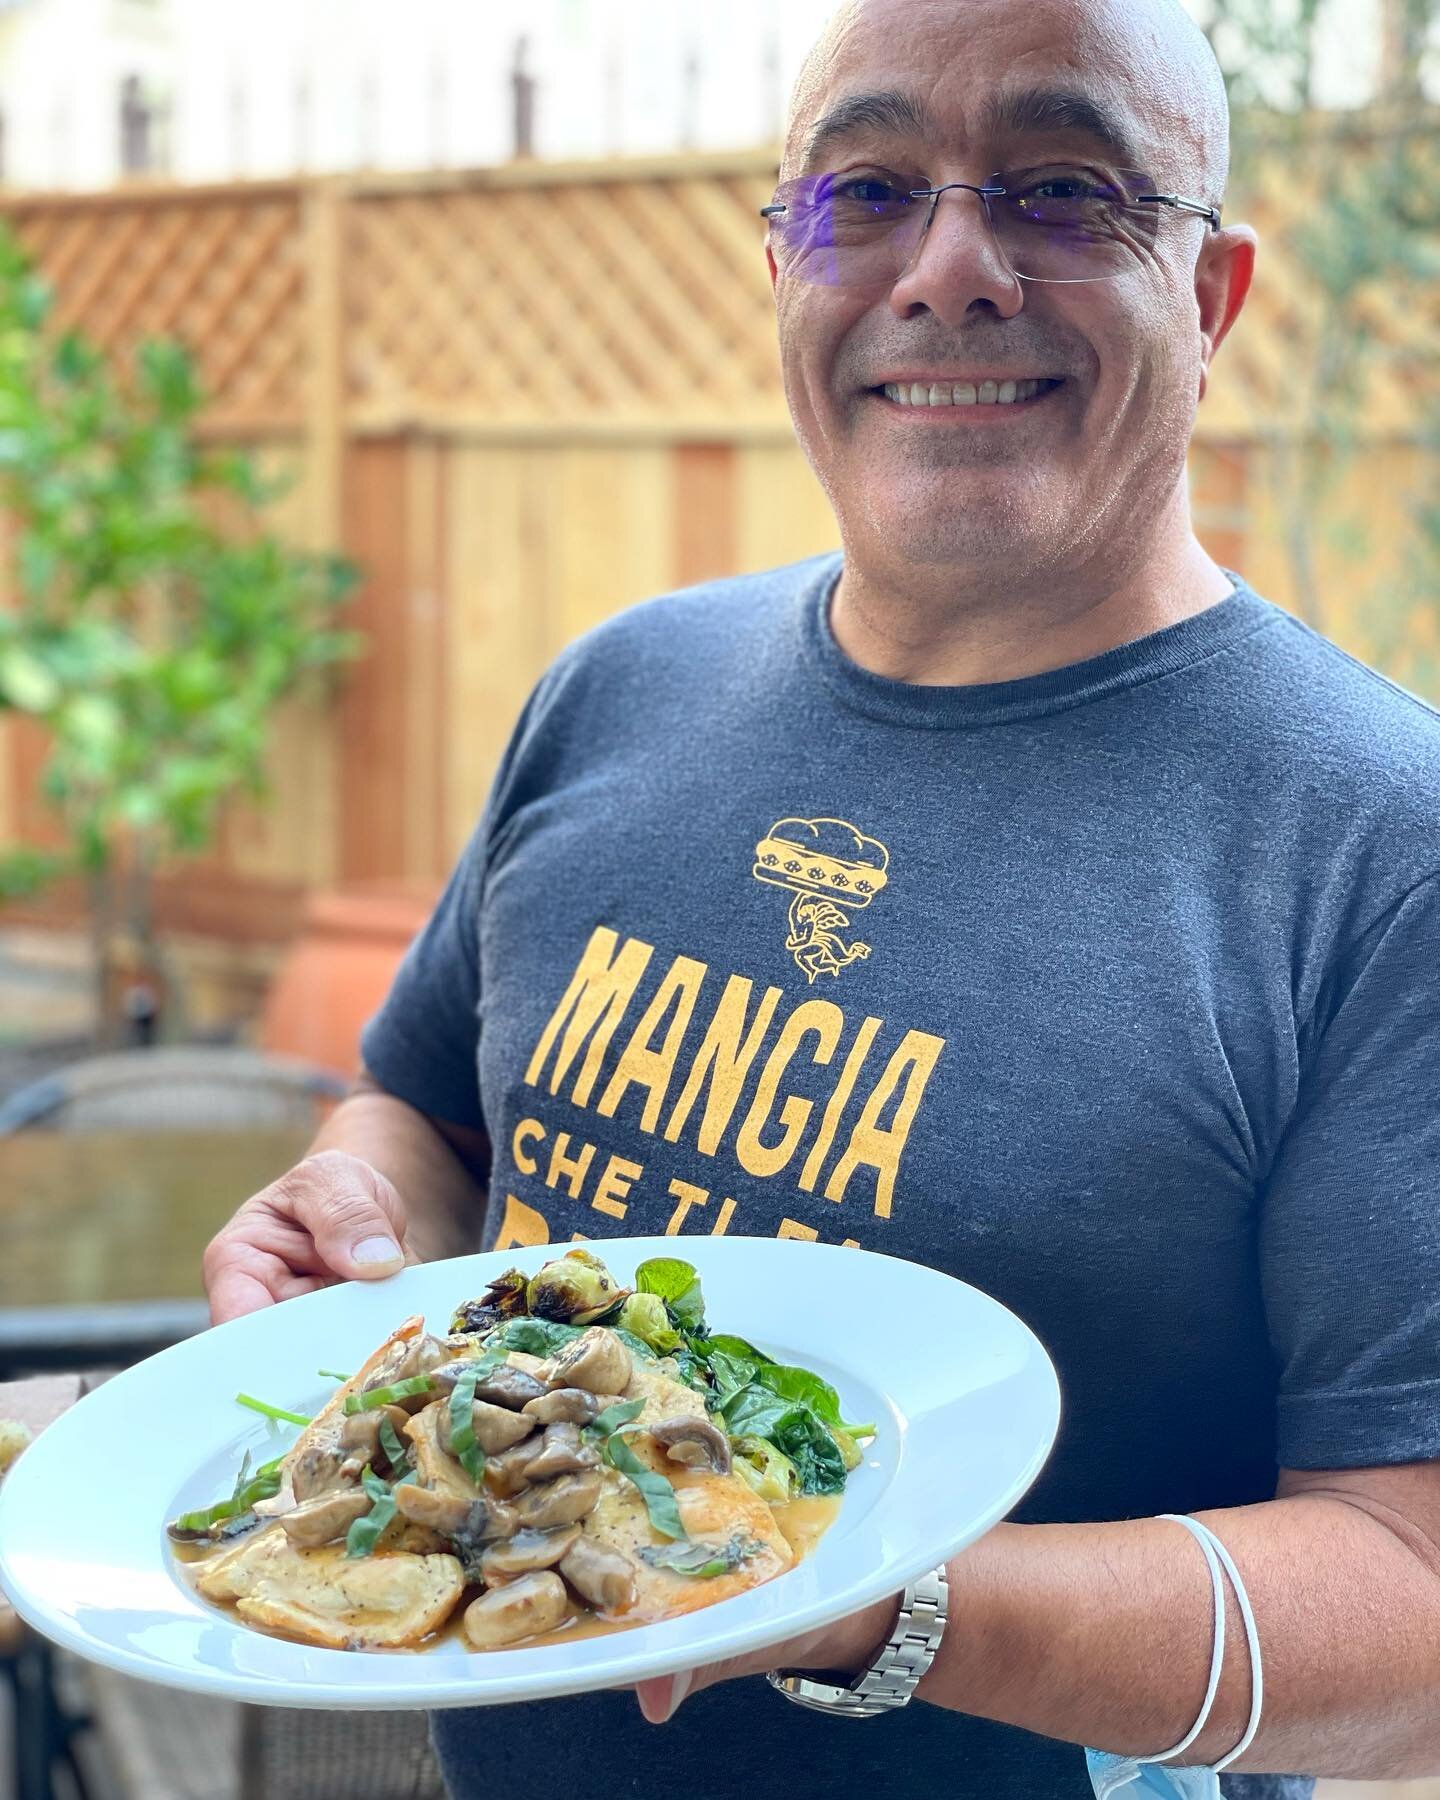 Mauro ~ the legend ~ is an industry vet that brings tradition, passion, and warm hospitality to our culinary philosophy. From Sardinia to Los Angeles, cooking has followed Mauro through every journey of life. You&rsquo;ll find him pouring the finest 